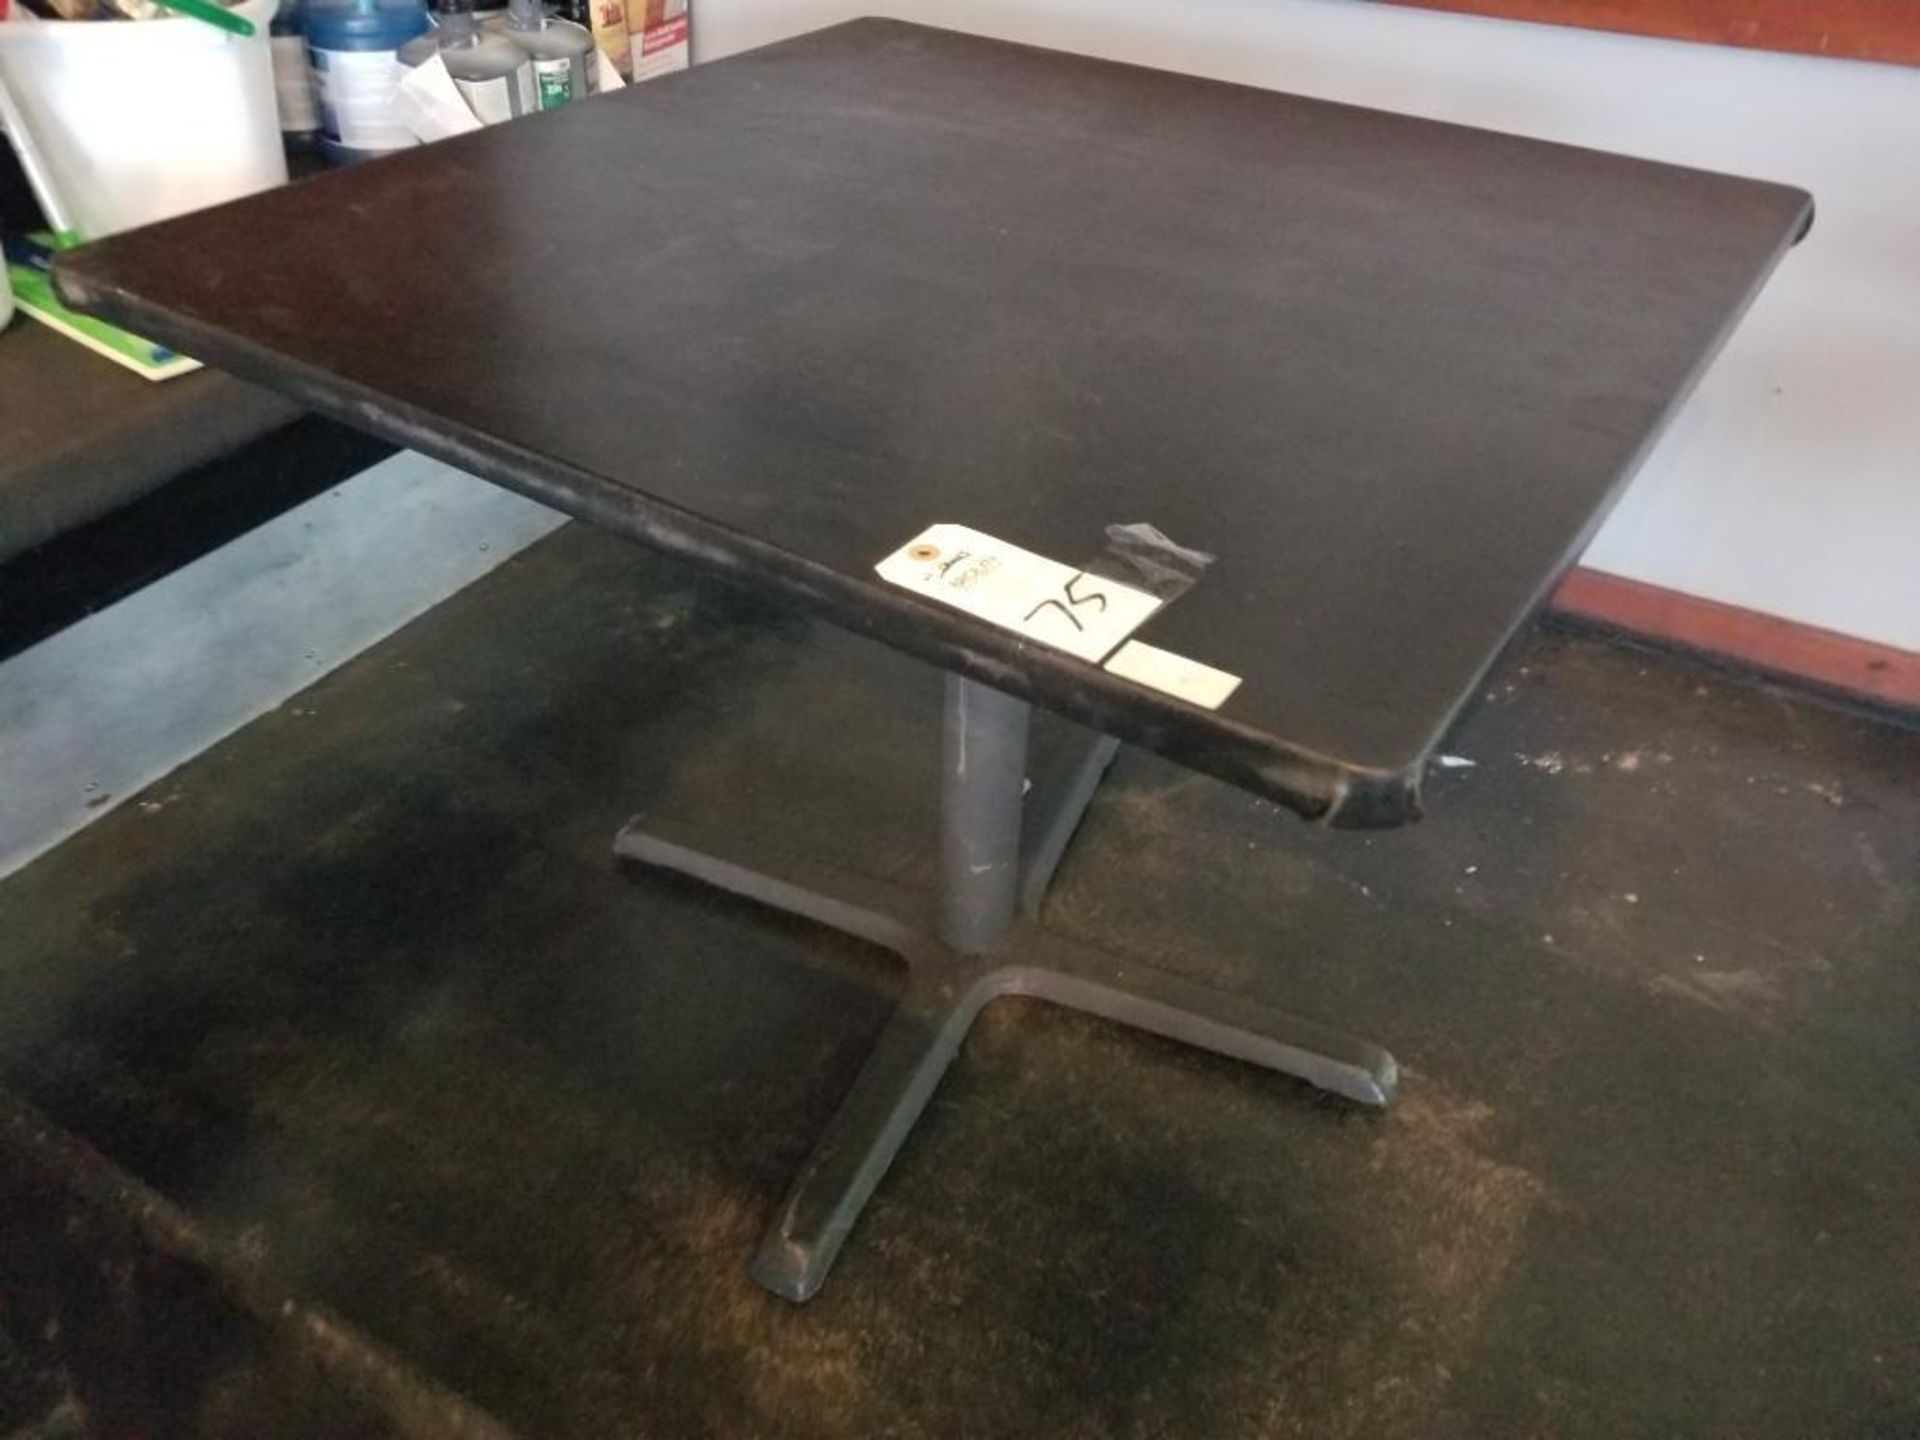 36in x 36in table with 4 chairs. - Image 2 of 3